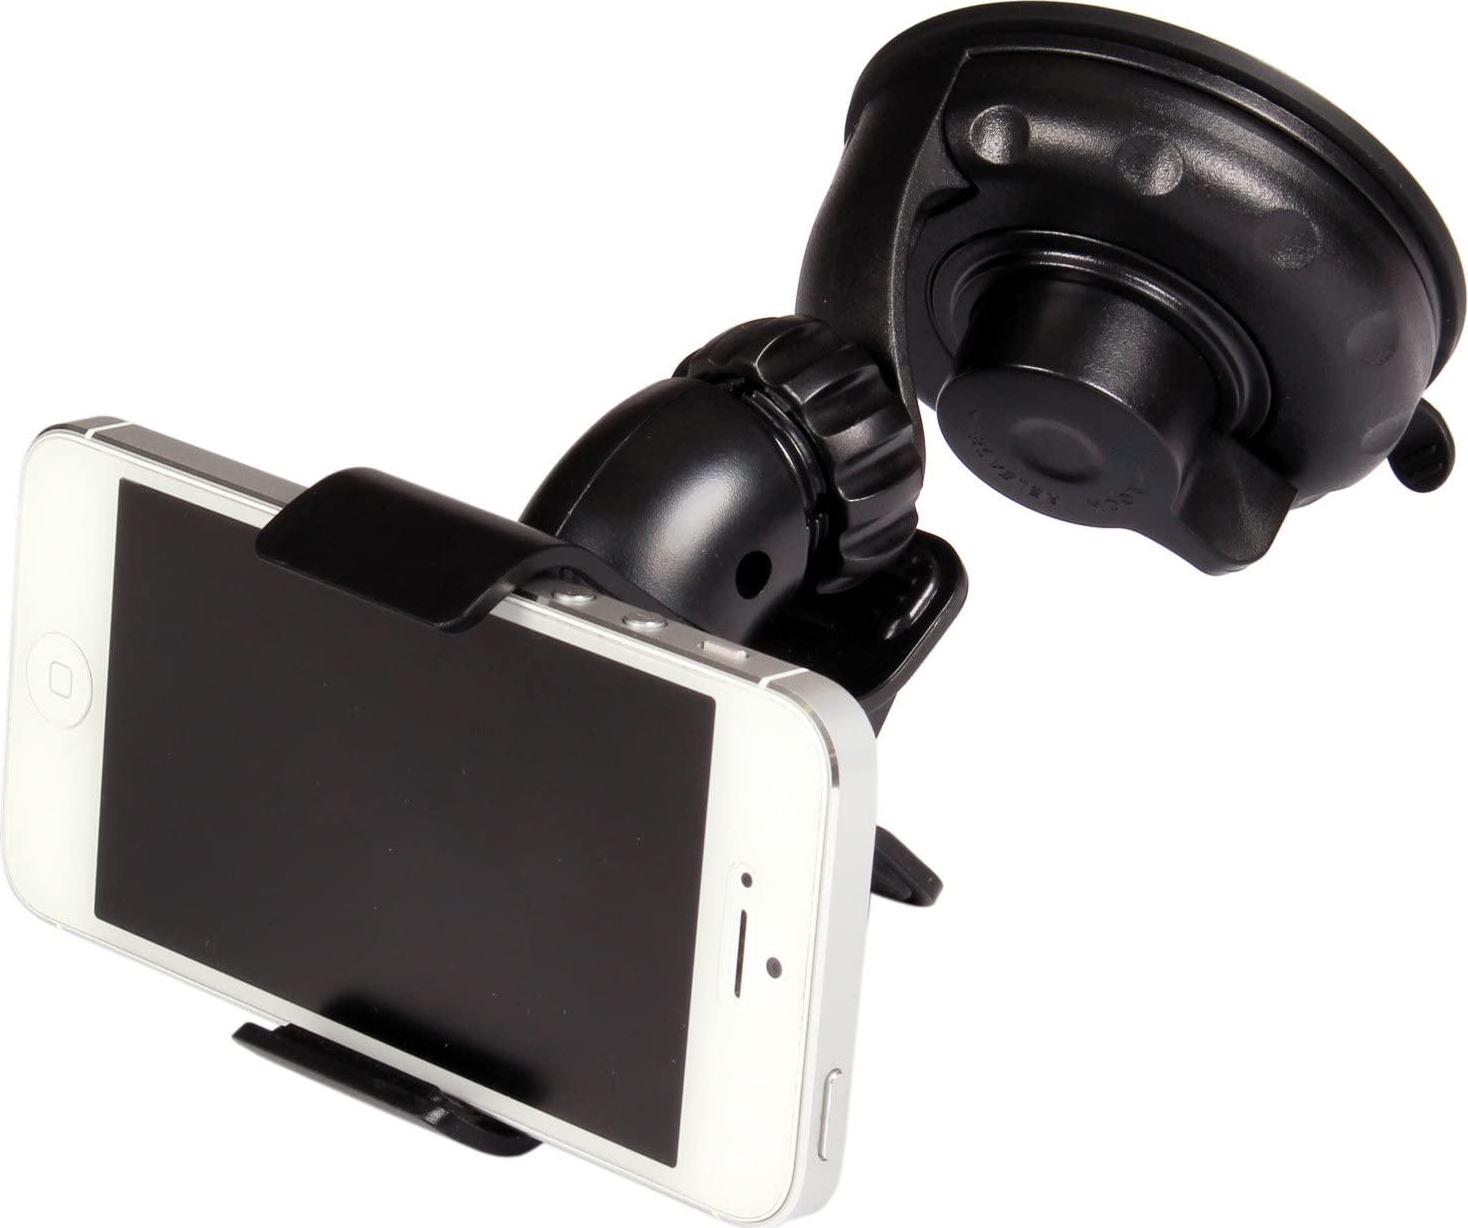 Goodyear, Good Year 77050 Edge Mount for GPS and Mobile Phone Car Mount with Universal Suction Cup